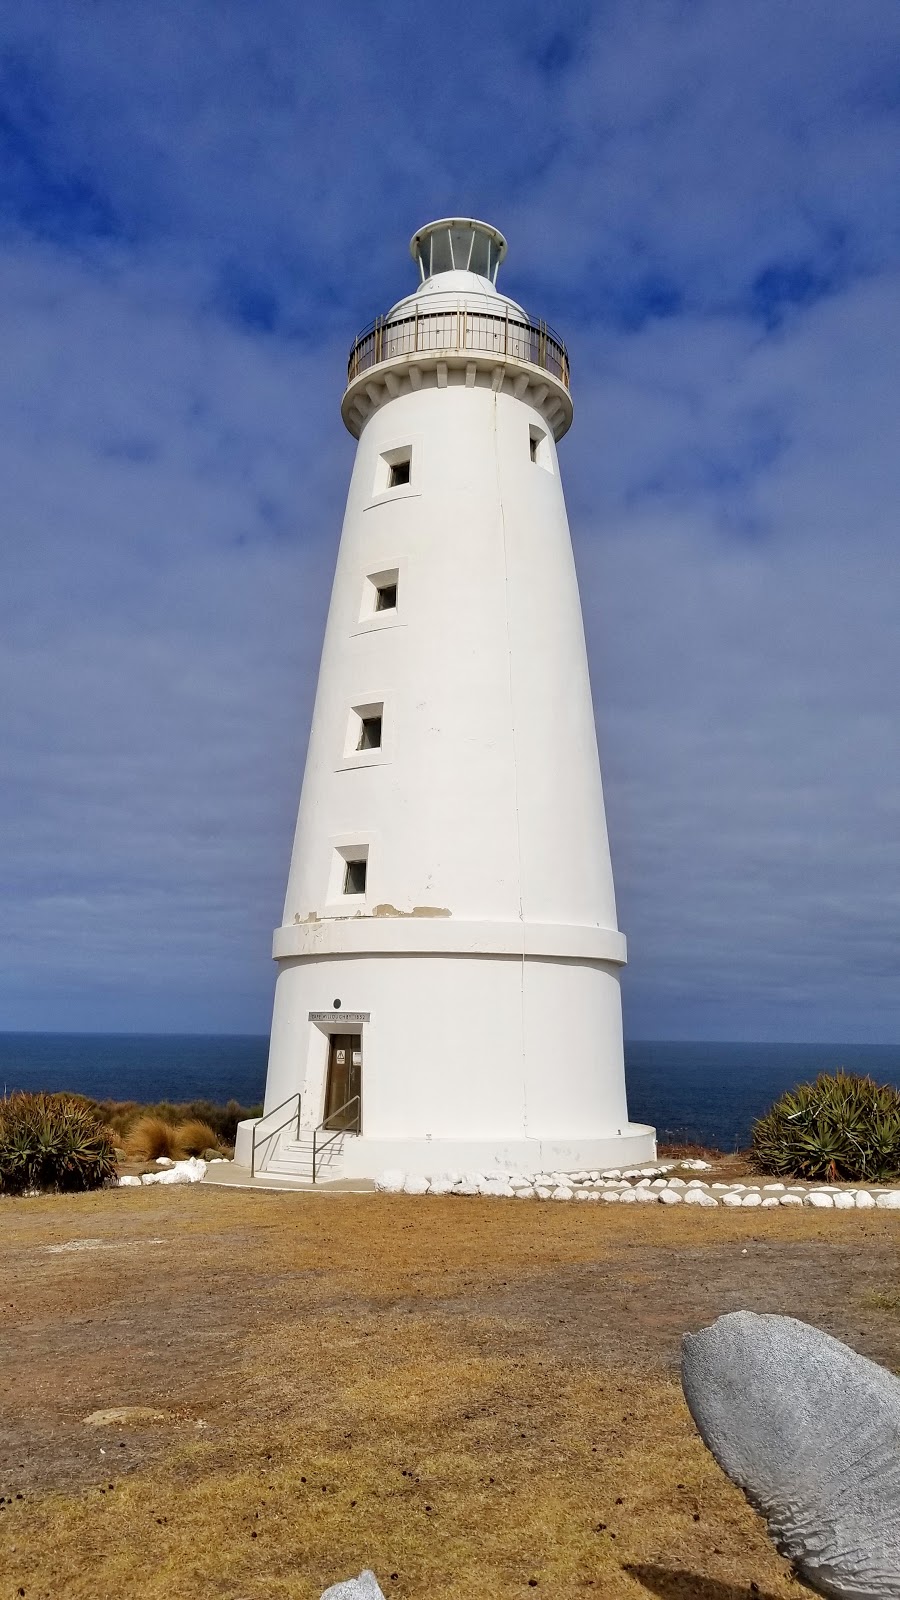 Cape willoughby Lighthouse Museum and Tour - Willoughby SA 5222, Australia